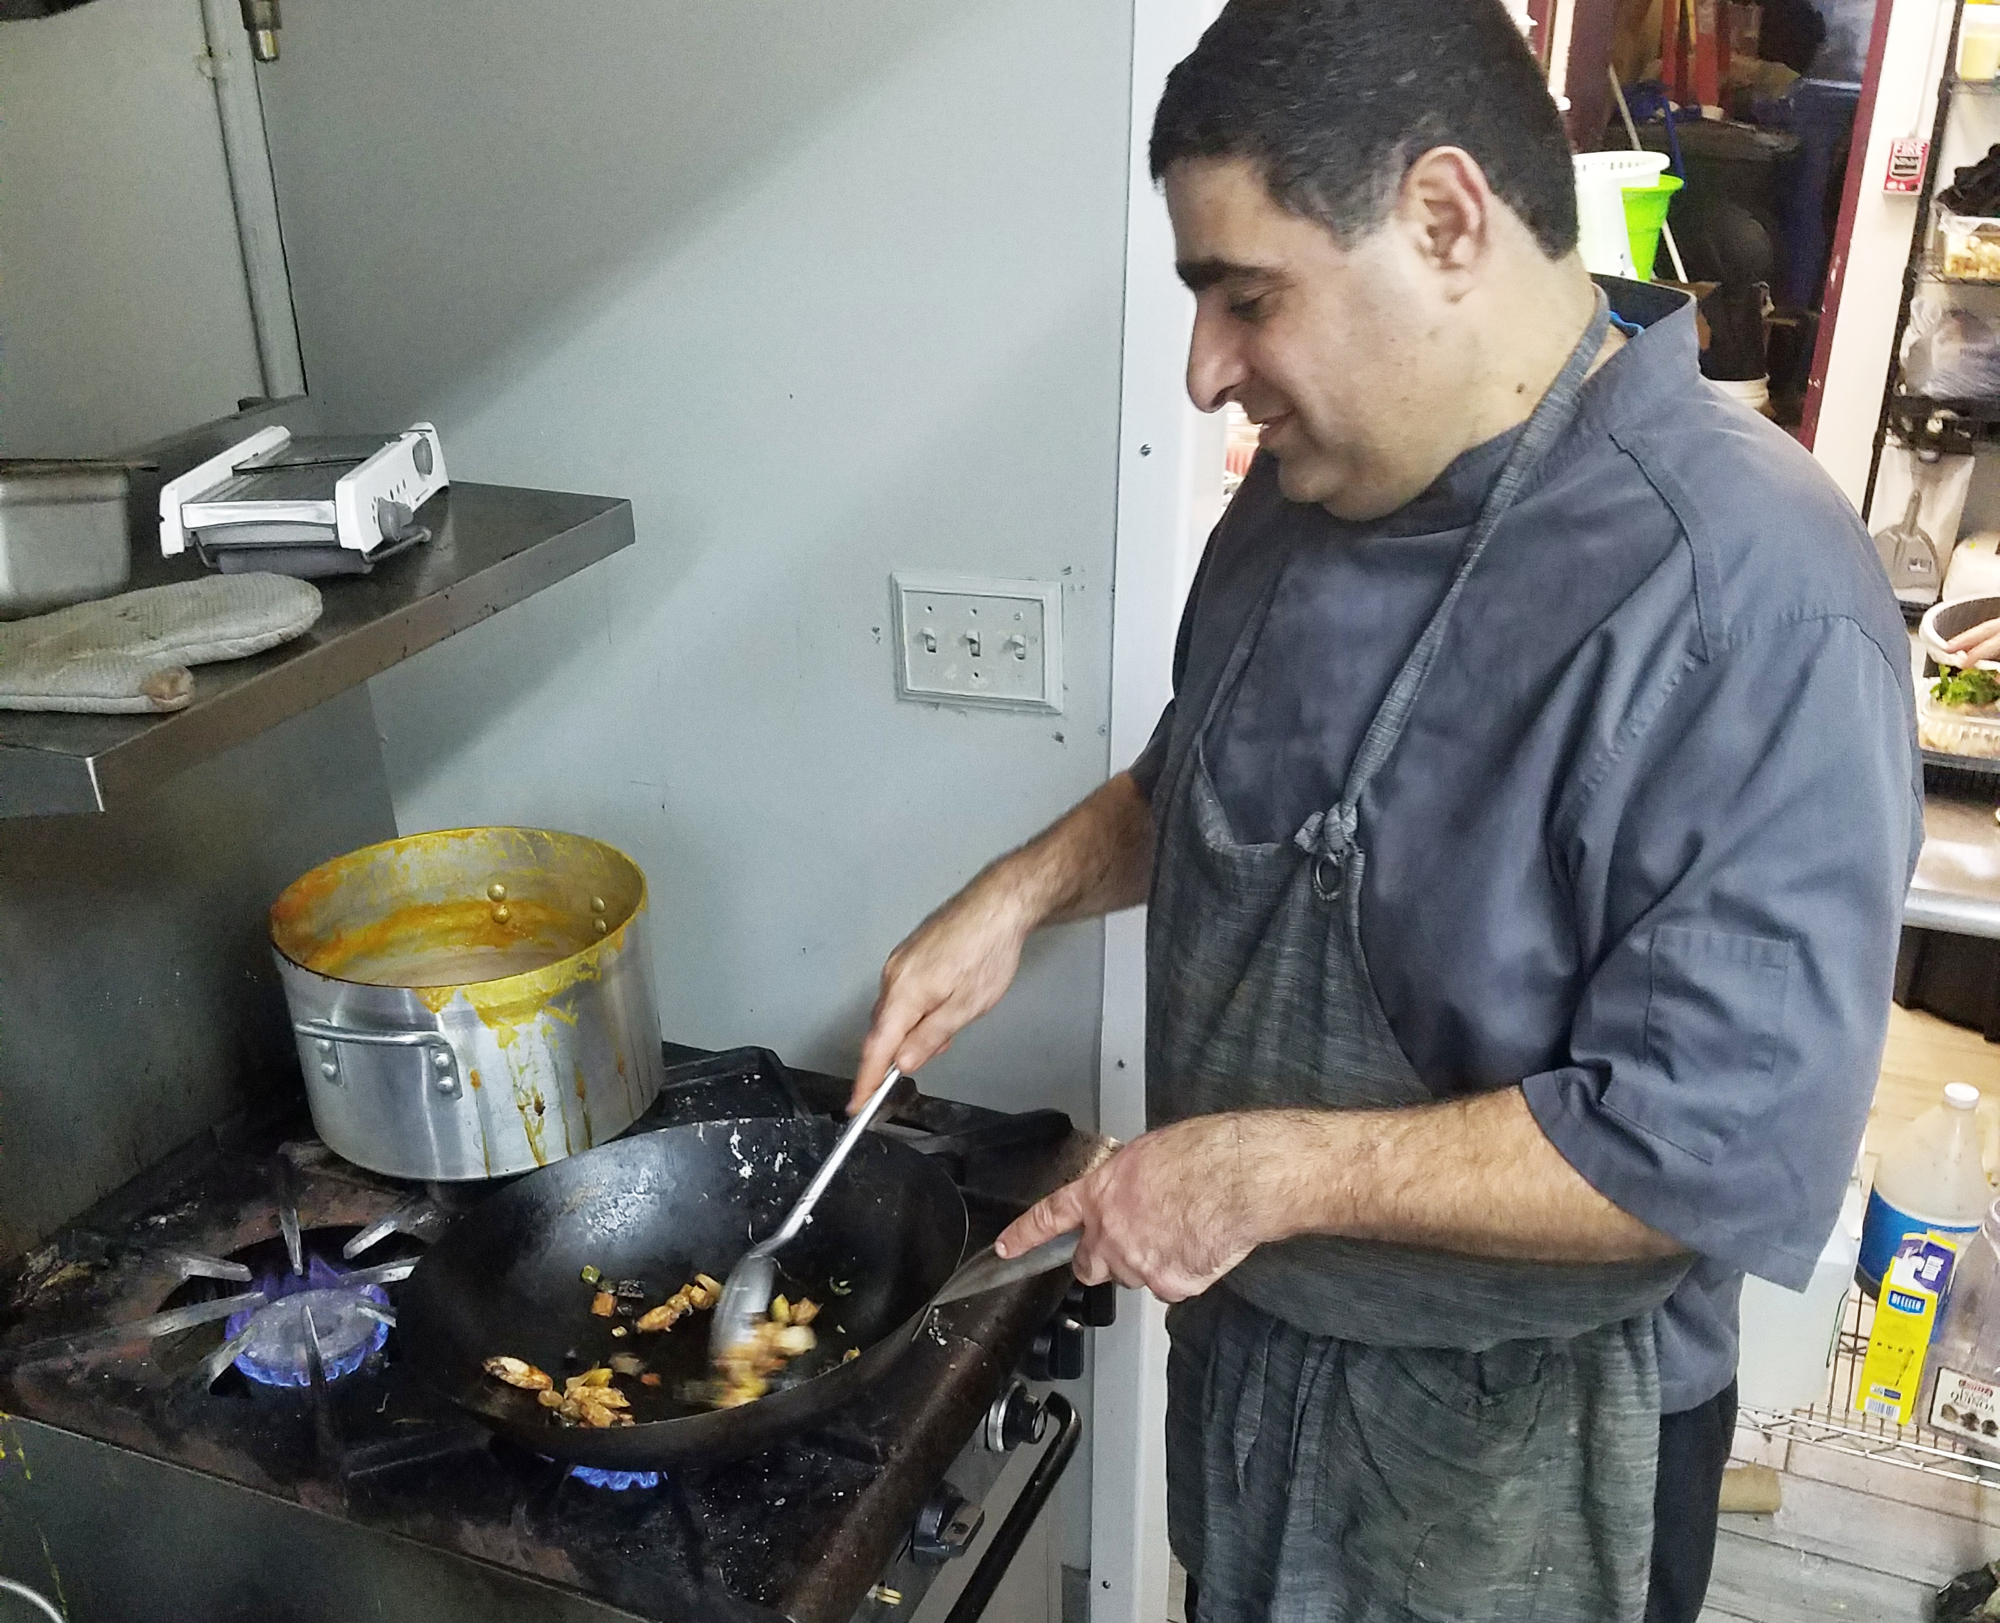 Head chef Gili Ben Simon prepares a kosher dish at the restaurant named after him, Gili’s Kitchen Catering and Bakery.